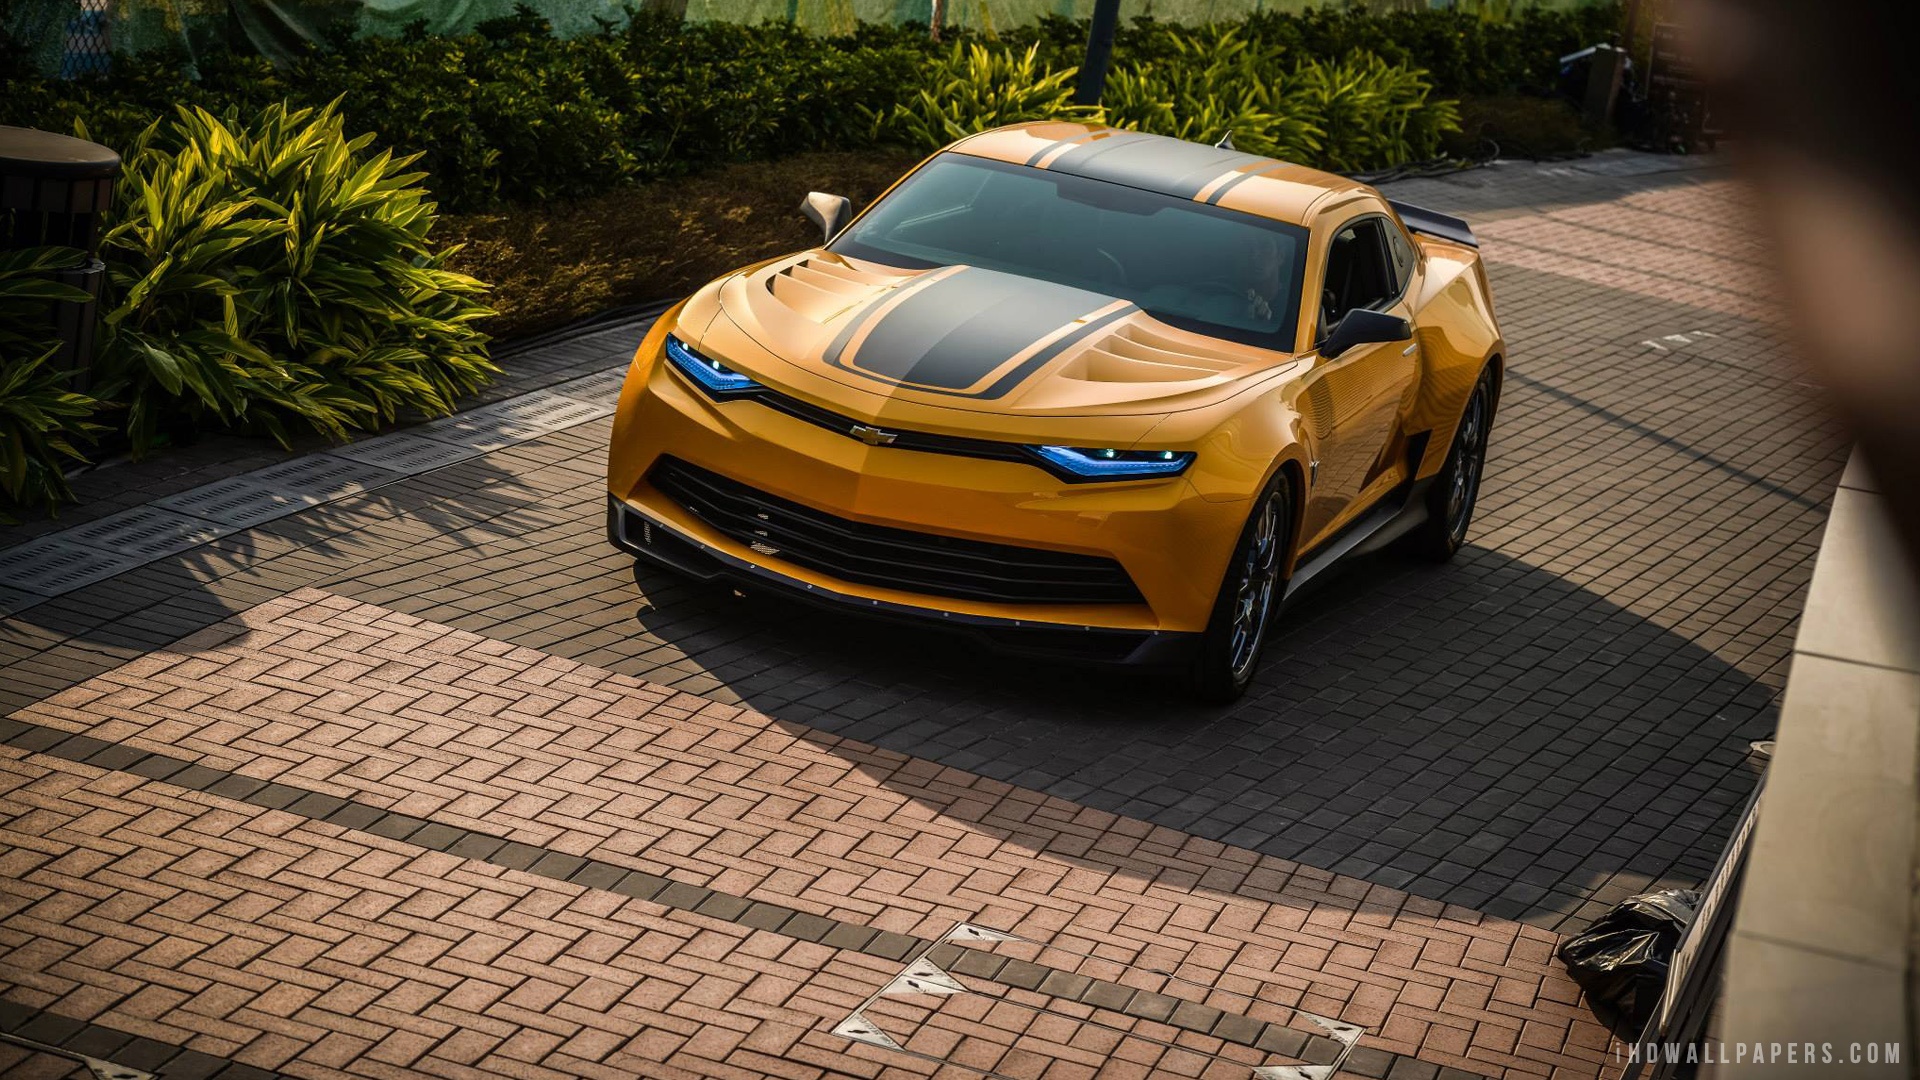 Download wallpaper for 1920x1200 resolution | New bumblebee Car in  Transformers 4 | movies and tv series | Wallpaper Better